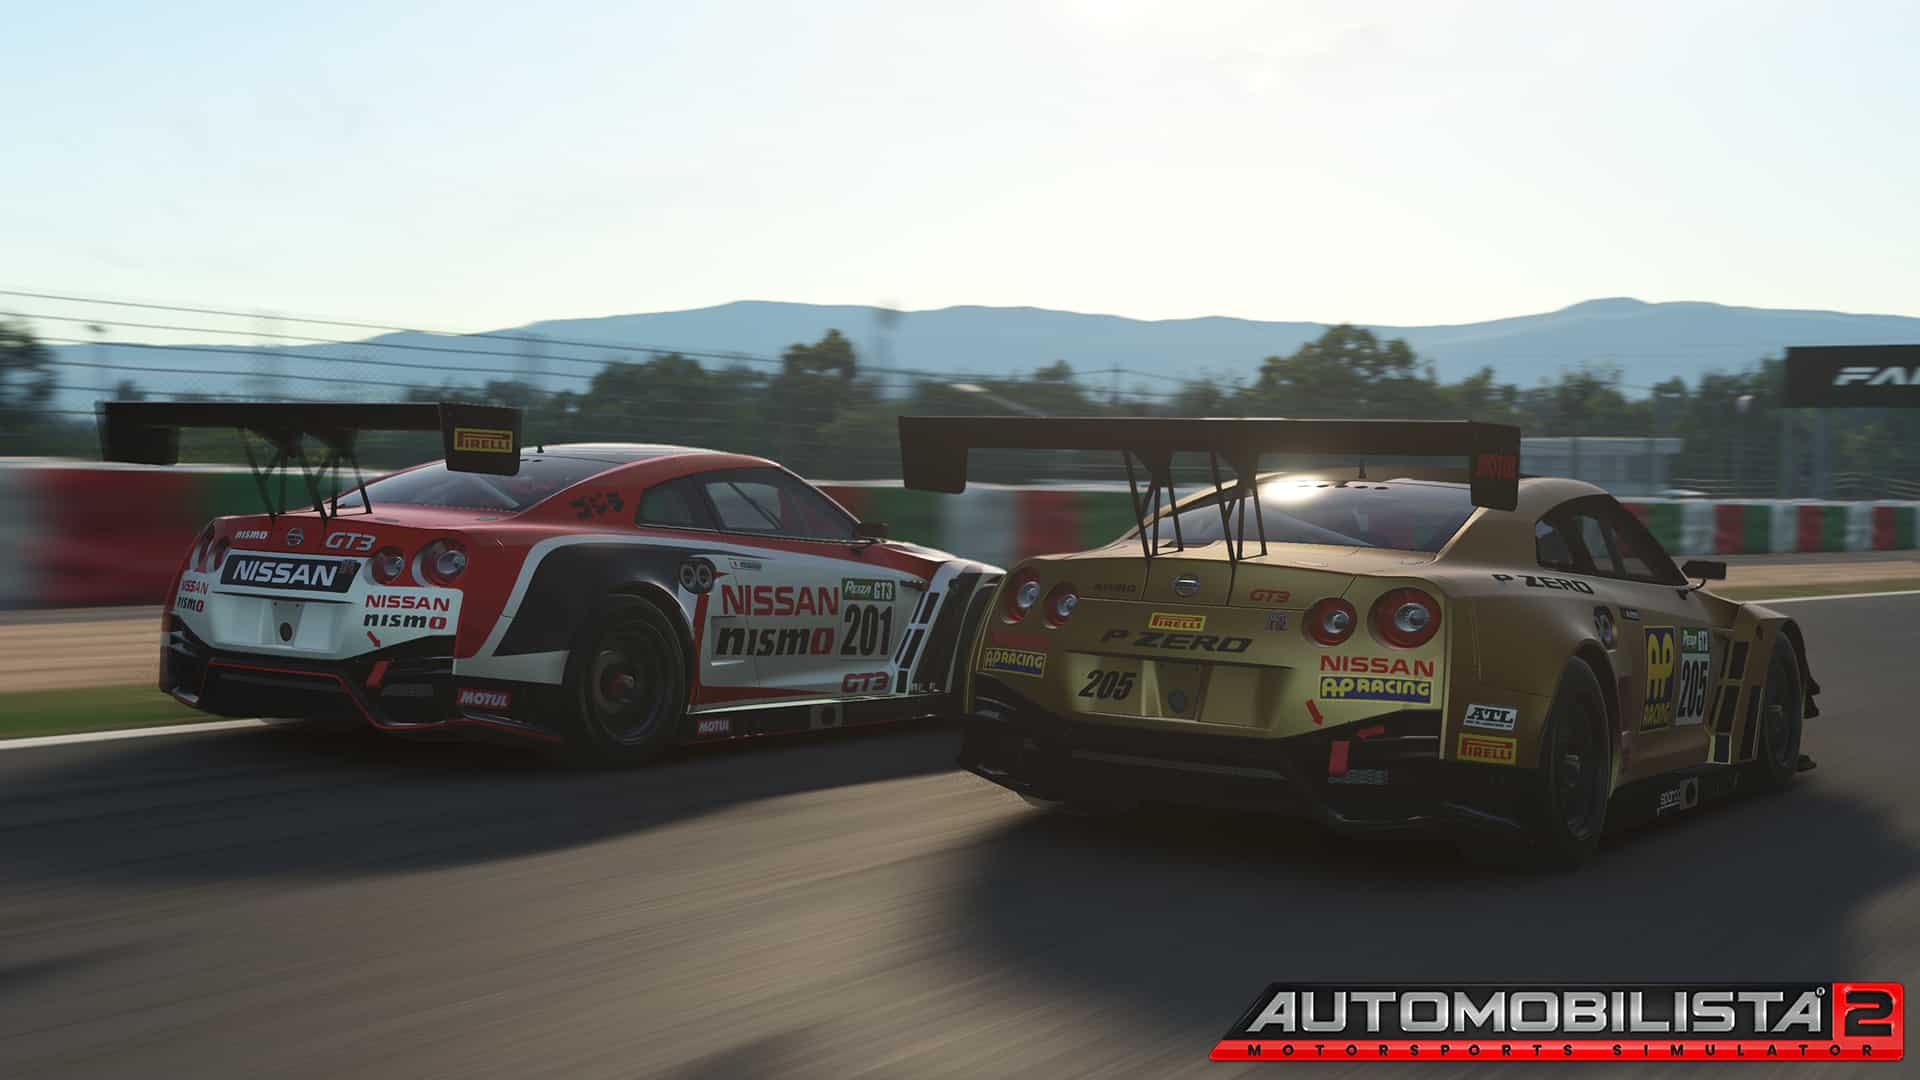 Enhanced multiplayer, modding support and more coming to Automobilista 2 in 2023